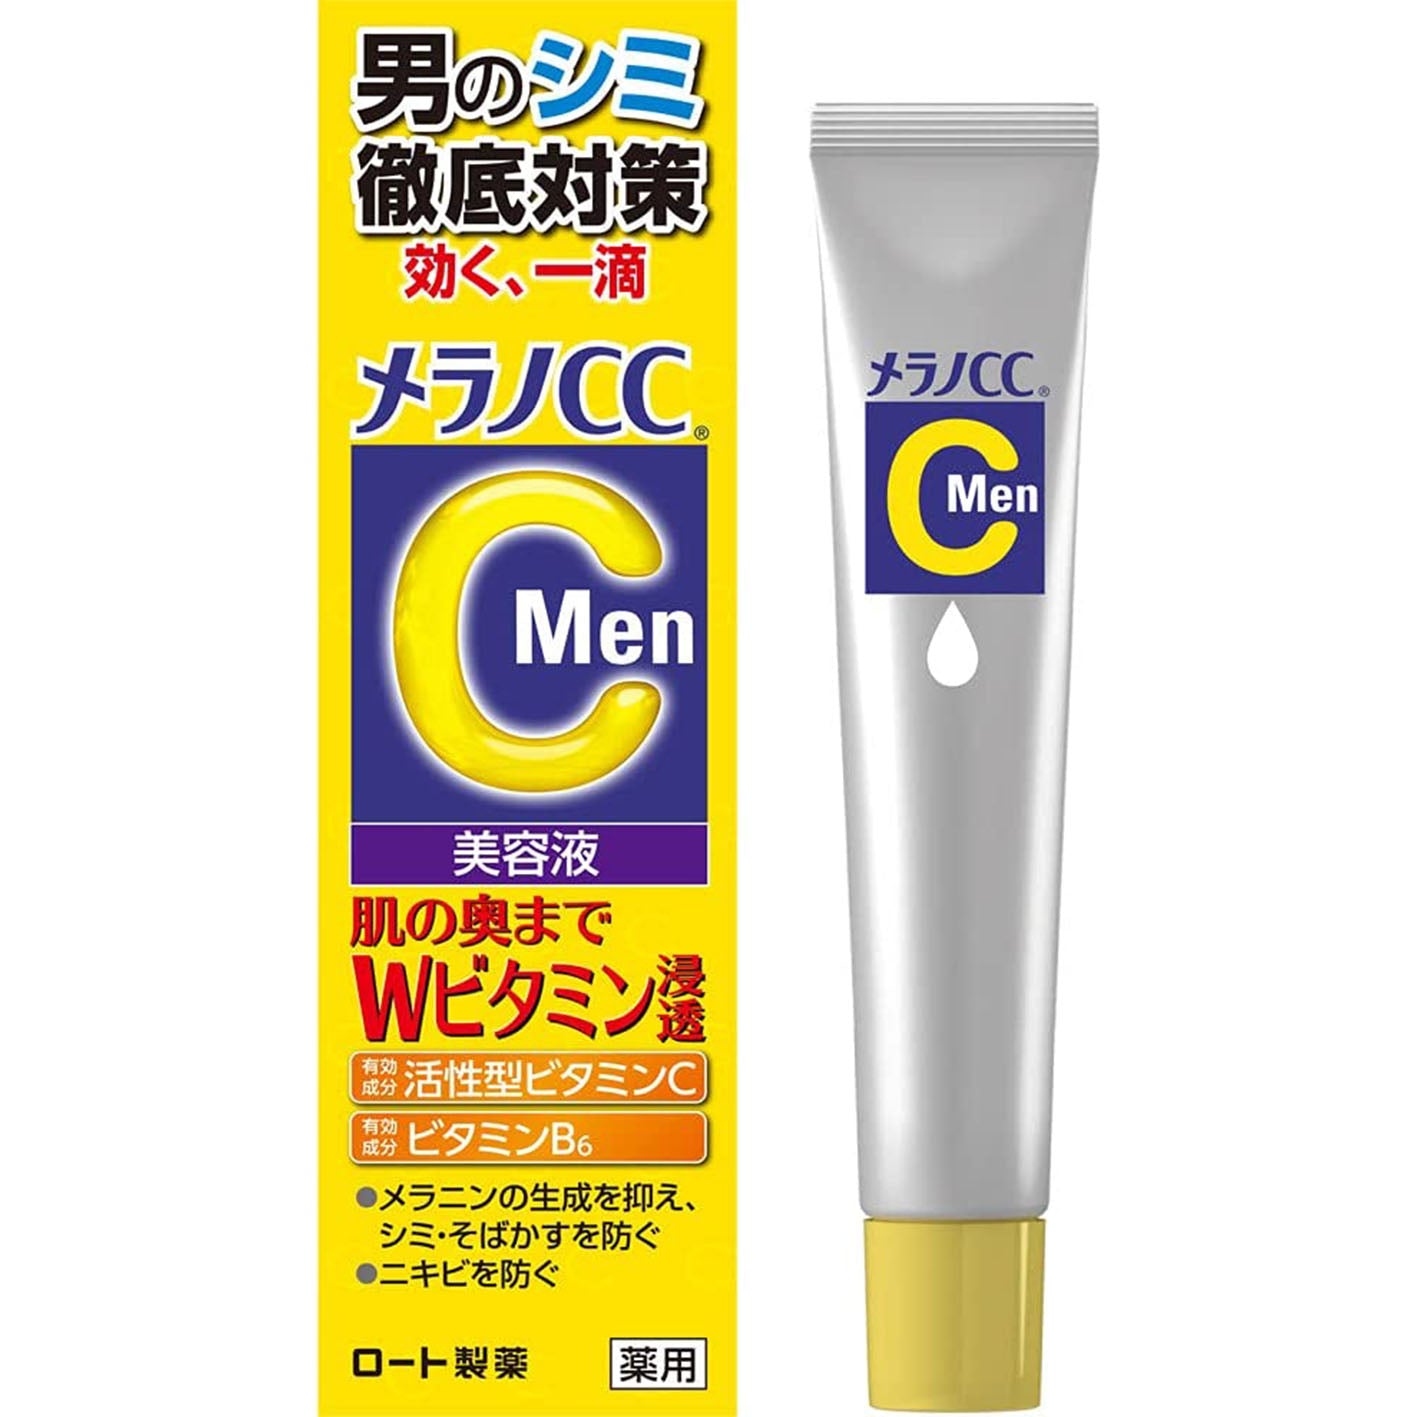 Rohto Melano CC Men Medicinal Stain Concentrated Measures Serum 20ml - Harajuku Culture Japan - Japanease Products Store Beauty and Stationery